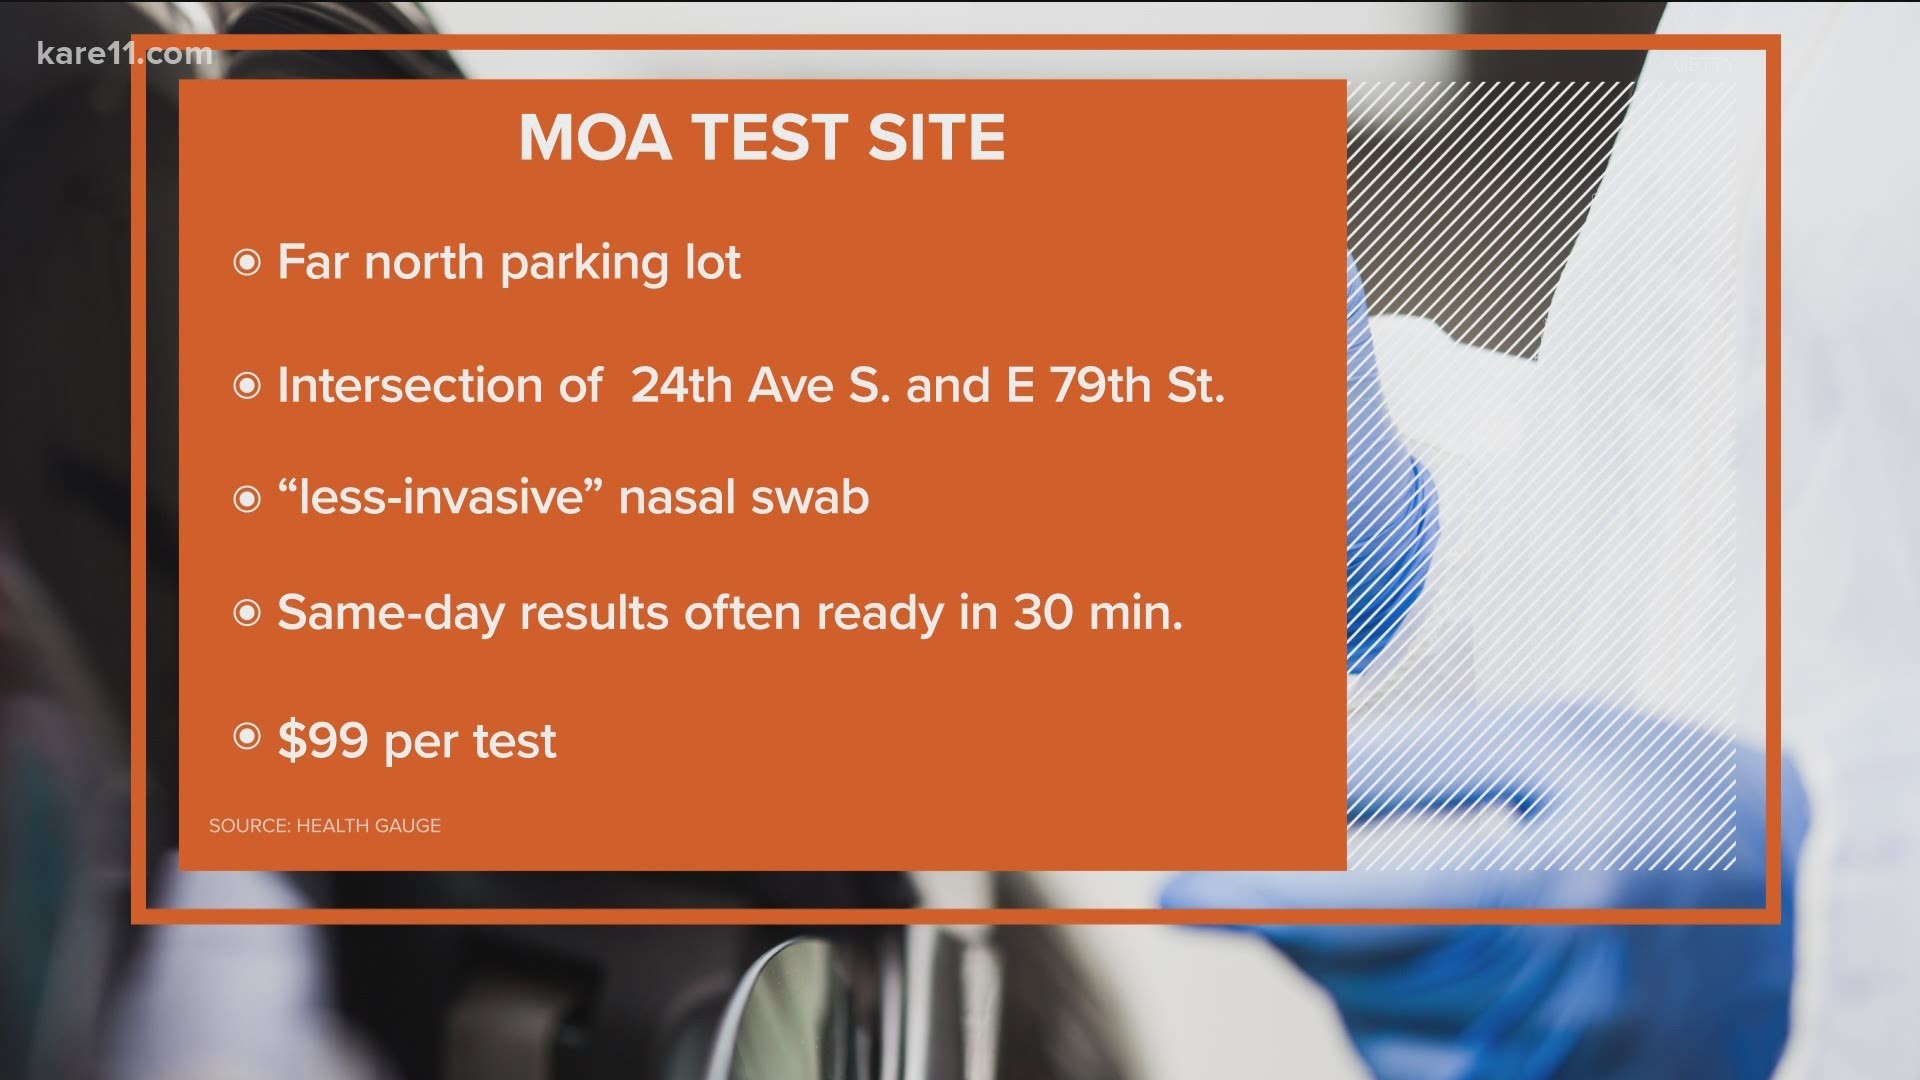 There is a new option starting today for people who want to get a COVID-19 test done, but need the results fast. And get this... it's in a drive-thru format at MOA.